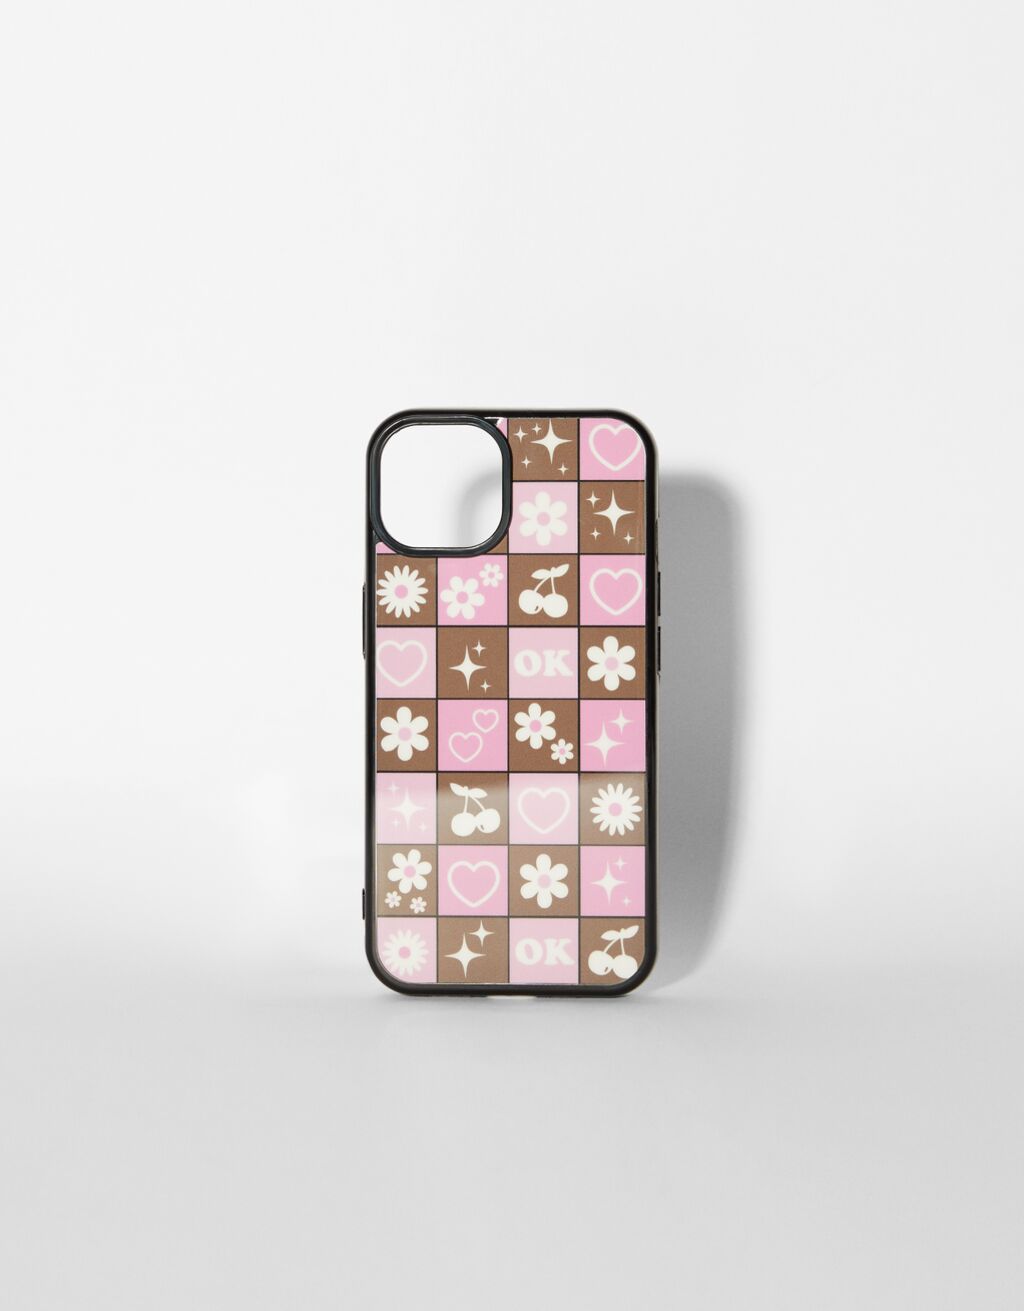 Printed cell phone case